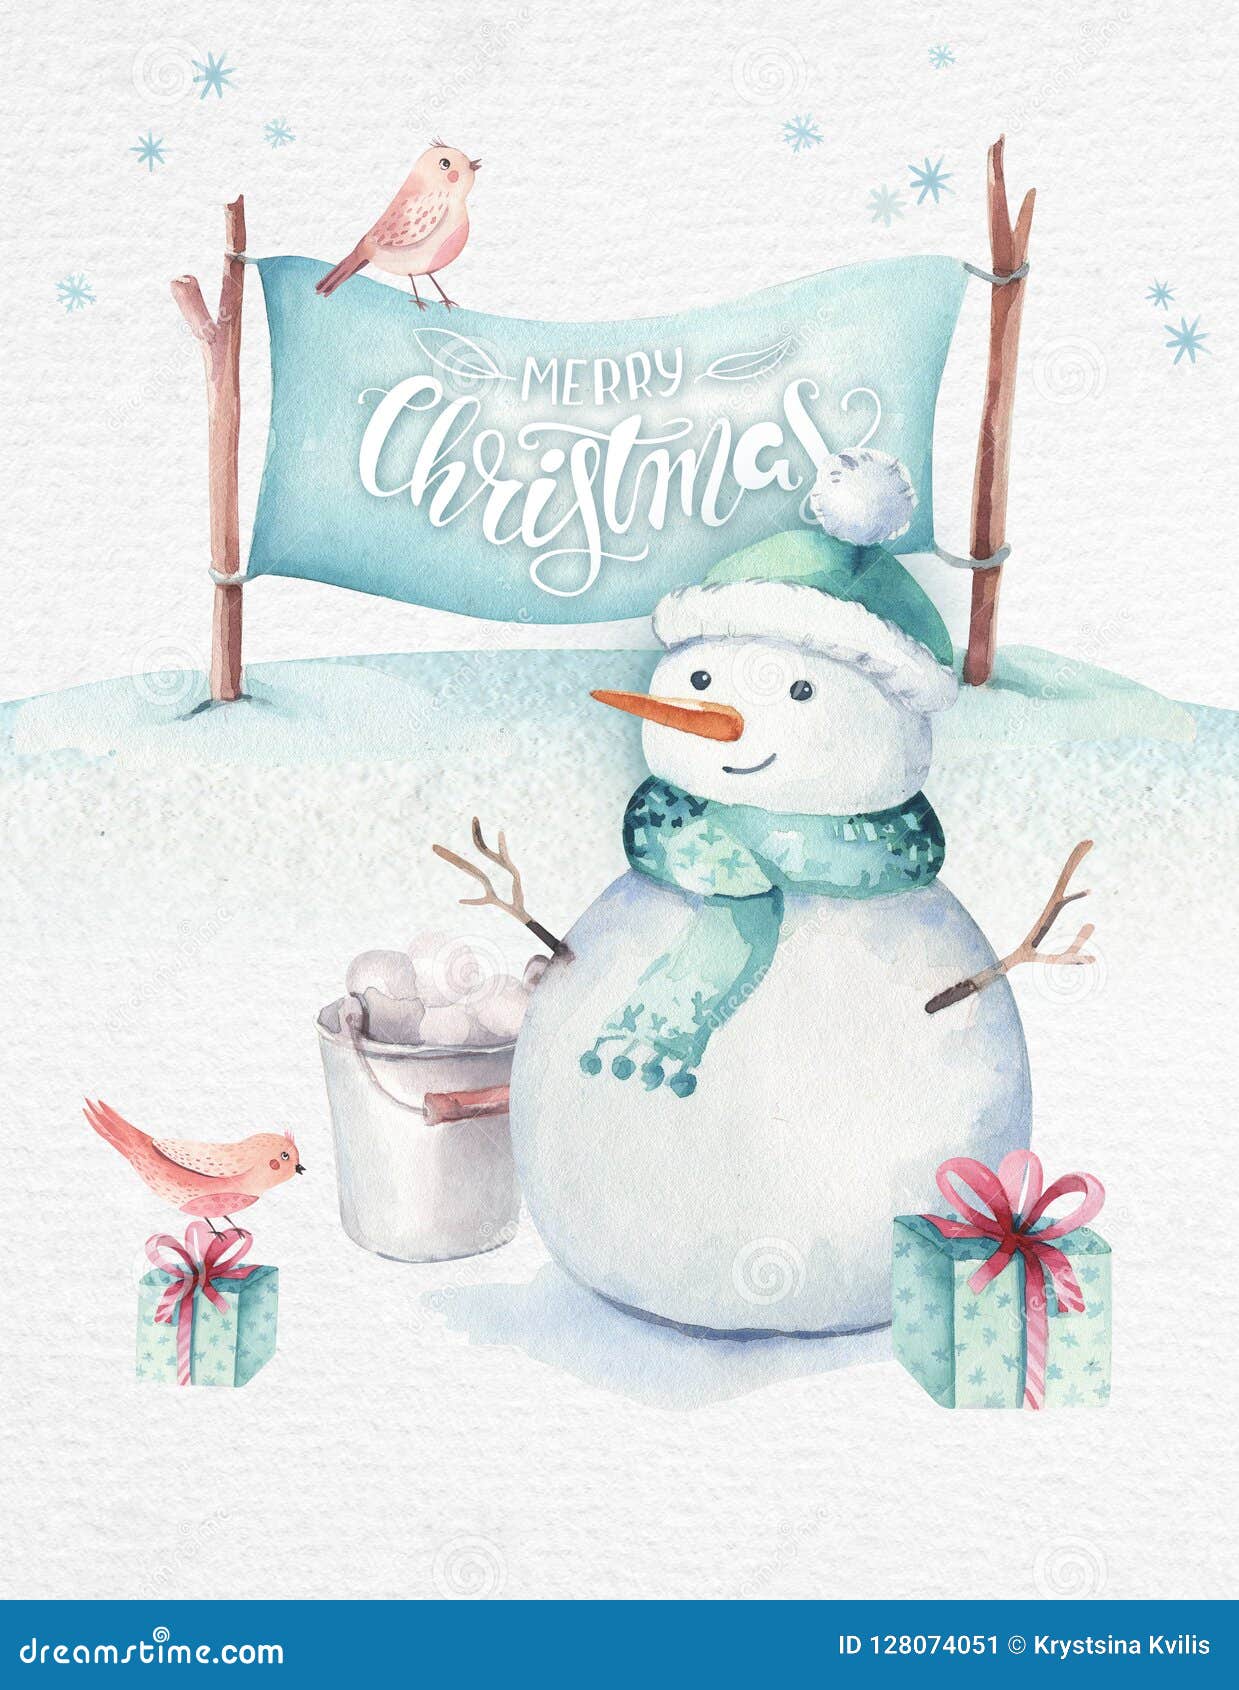 Download Watercolor Merry Christmas Illustration With Snowman ...